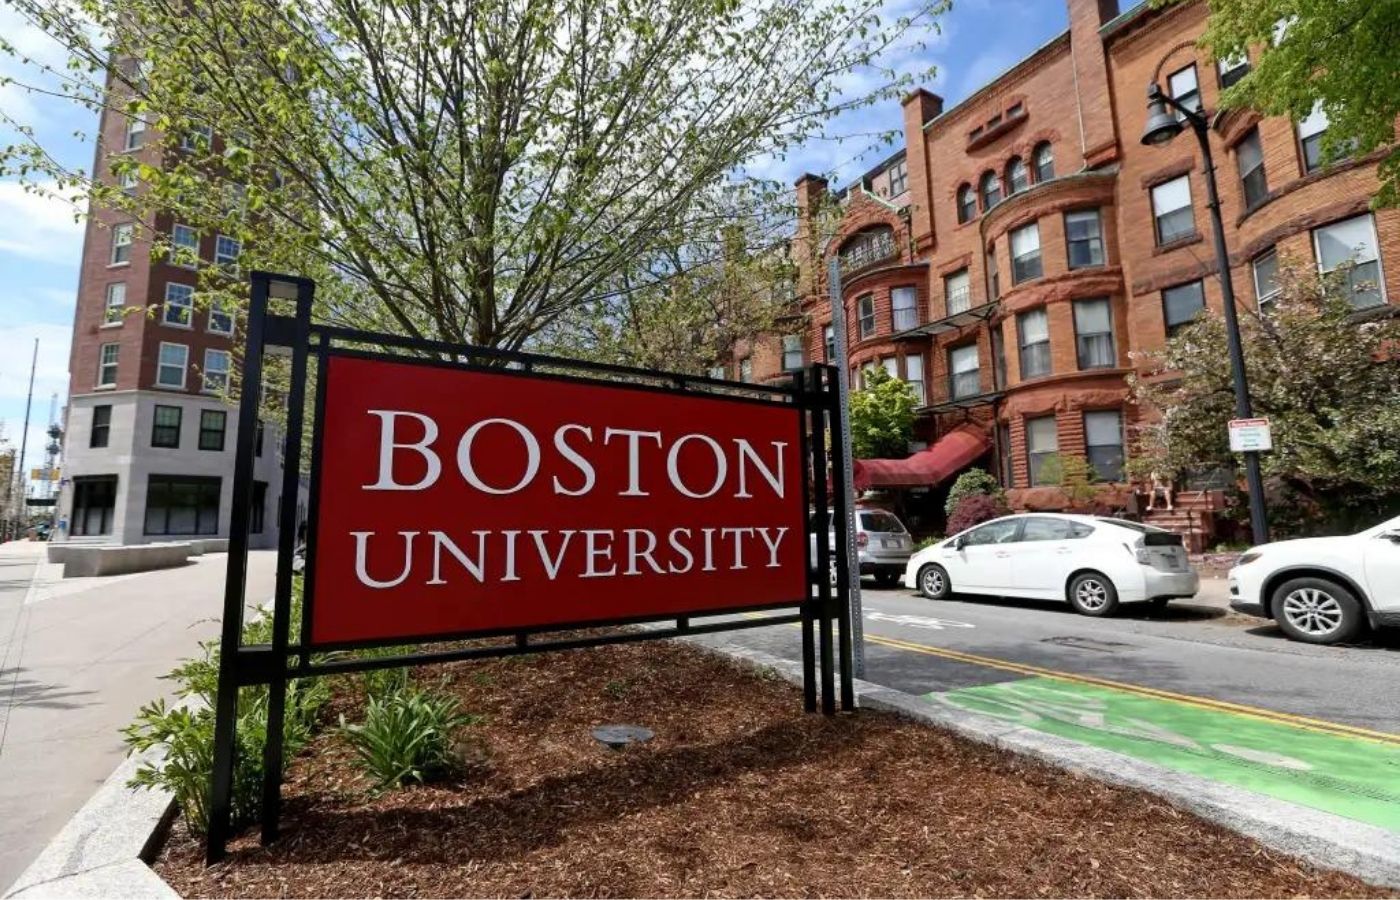 Boston University Life: How Students Are Making The Most Of The City